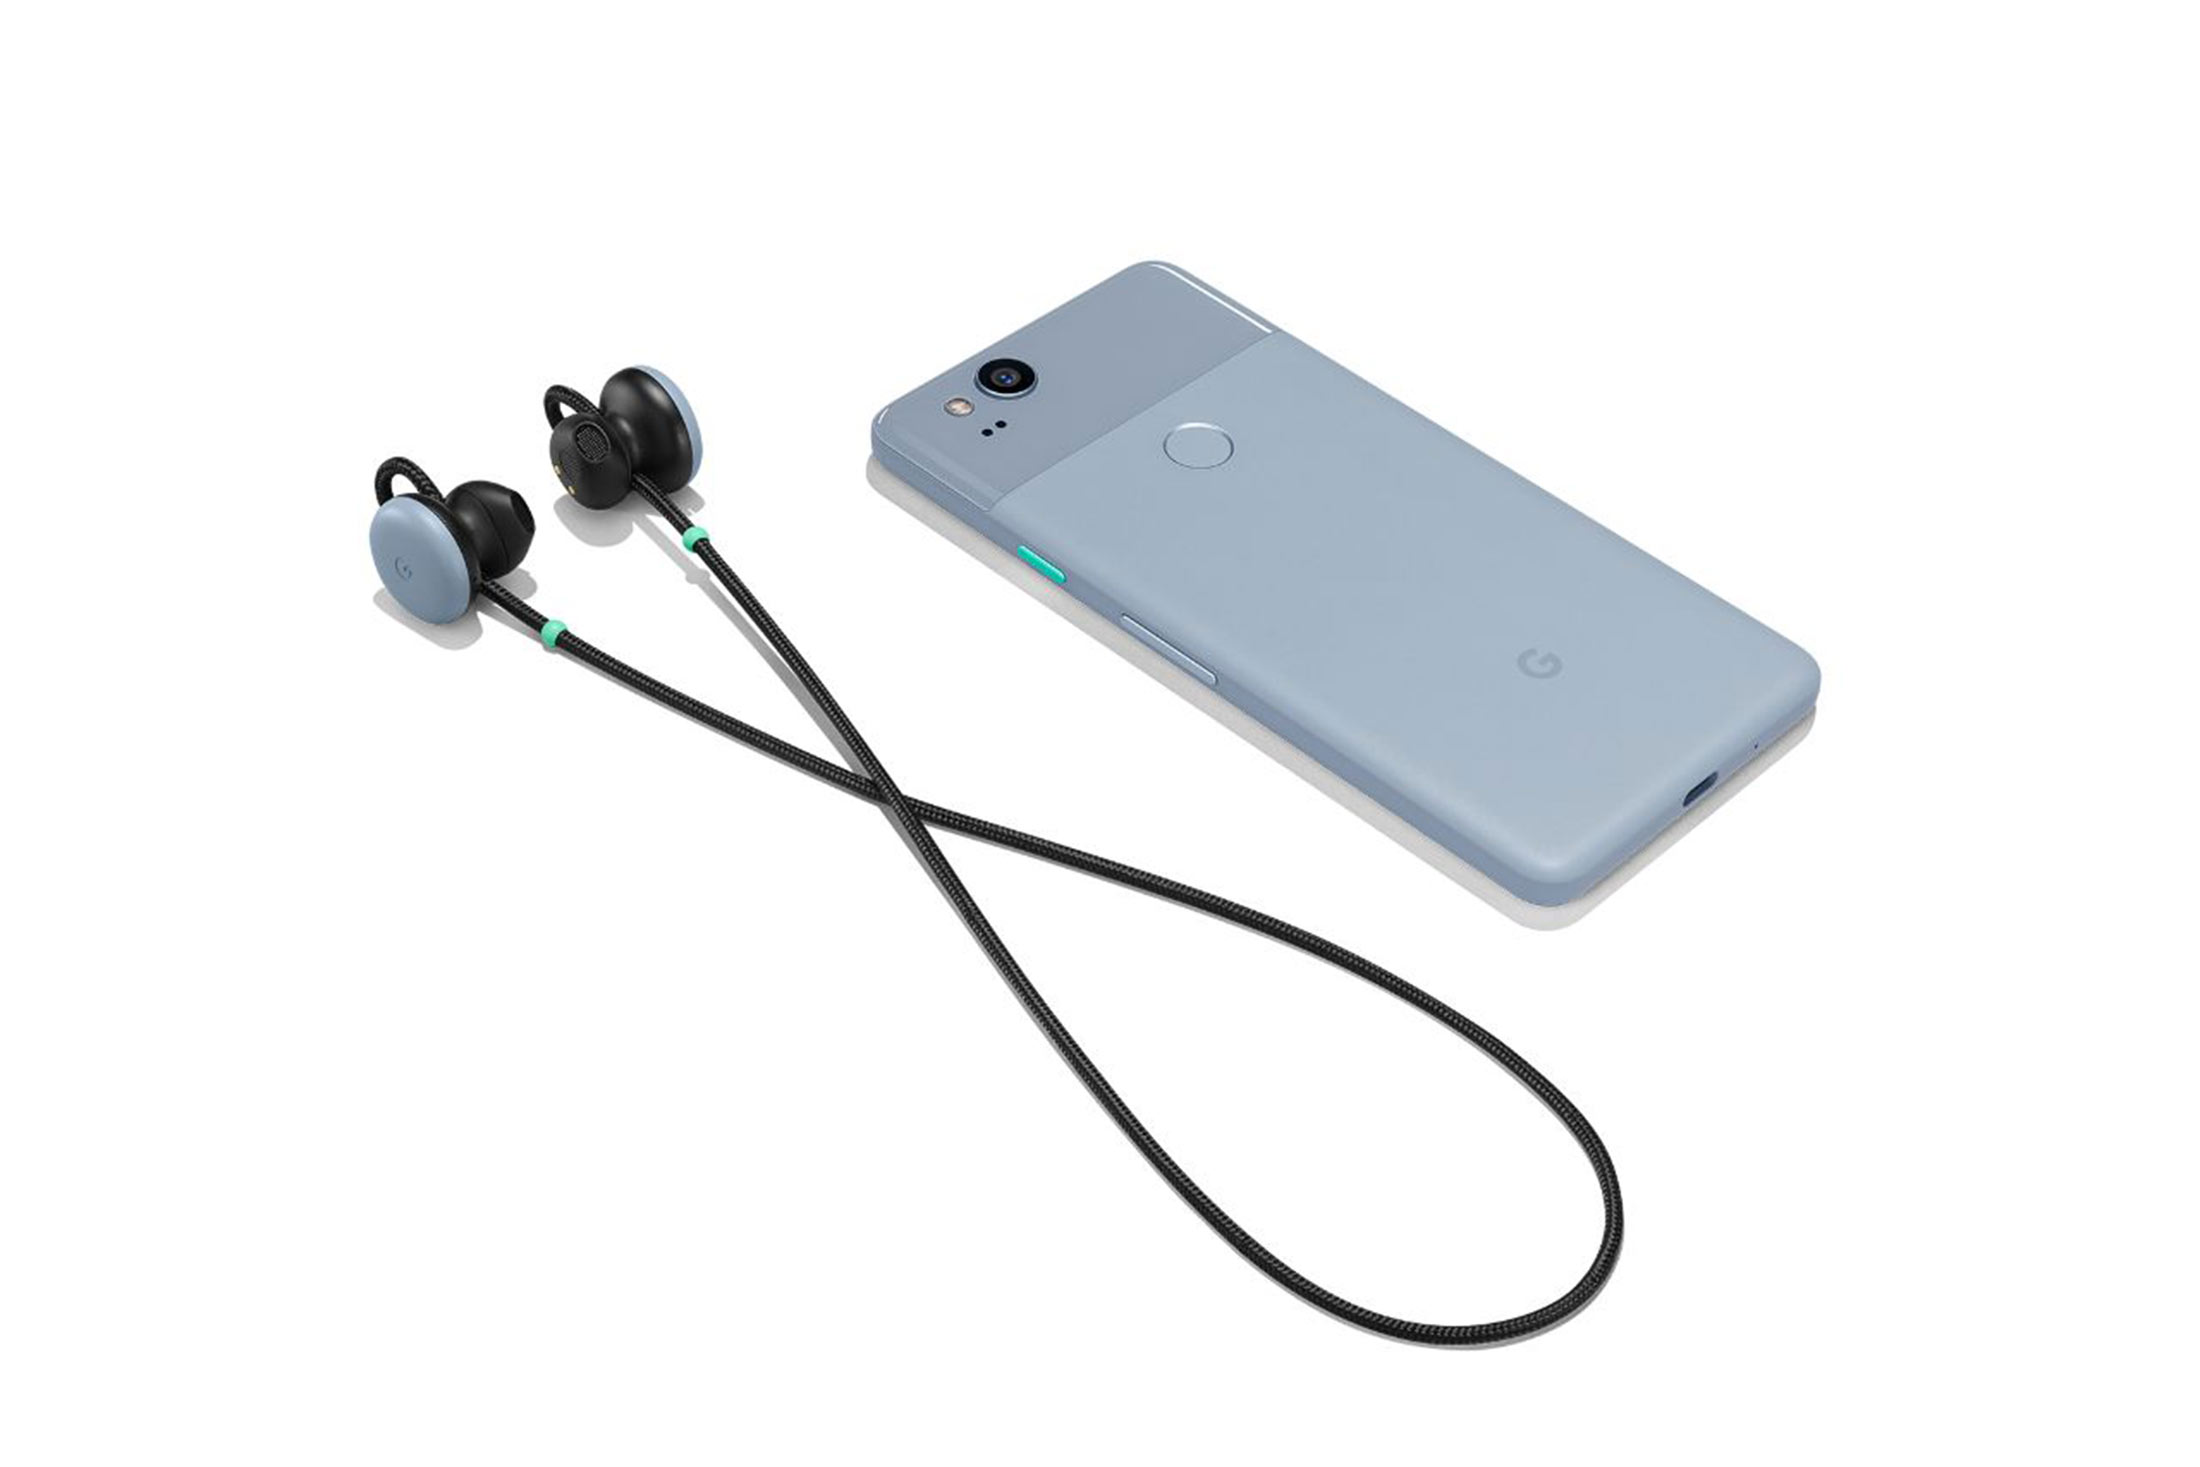 Google's Pixel Buds and Pixel 2
